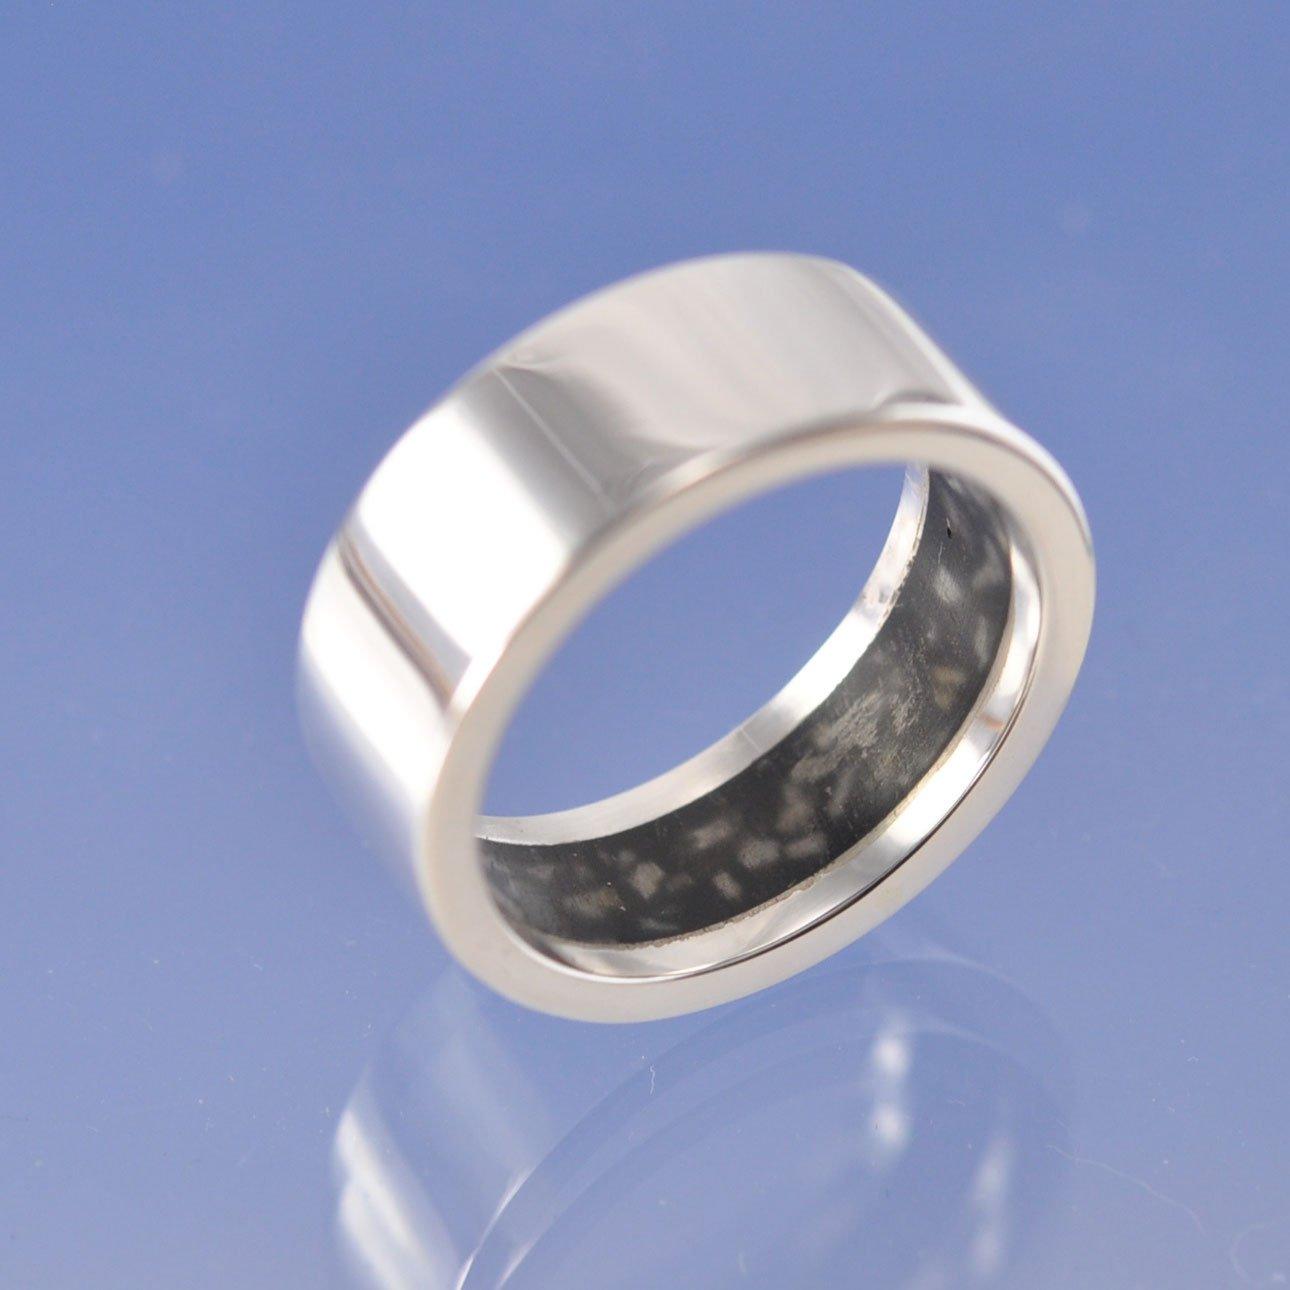 Cremation Ash Ring. Hidden Flat shank Ring by Chris Parry Jewellery